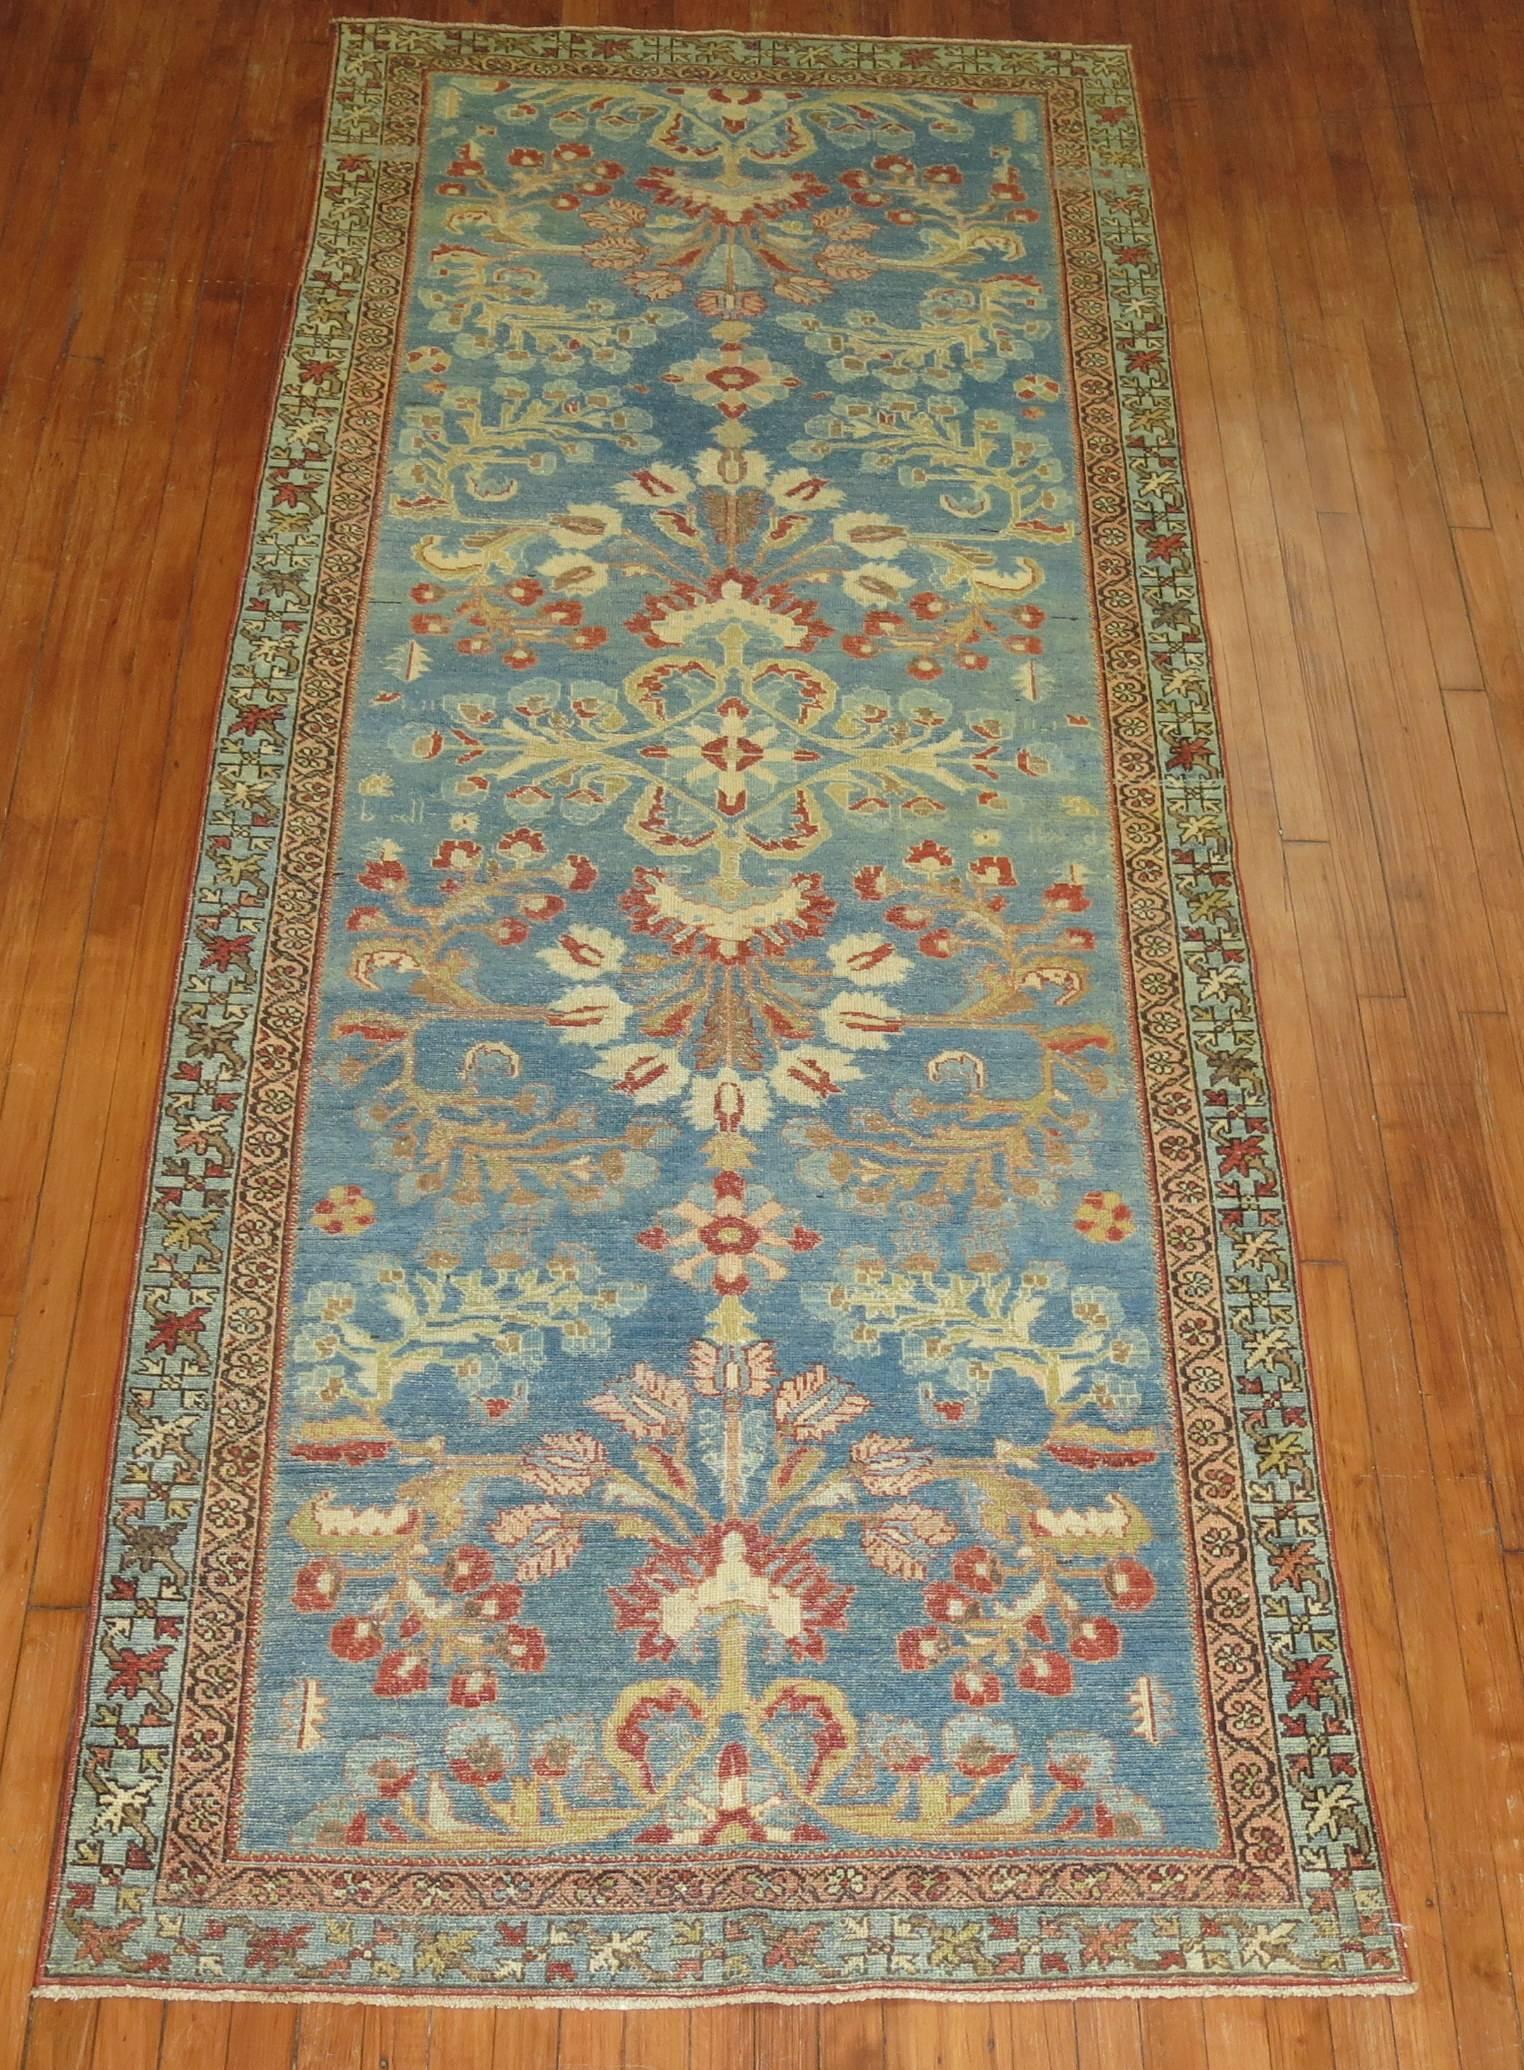 A formal Persian intermediate/accent size rug.